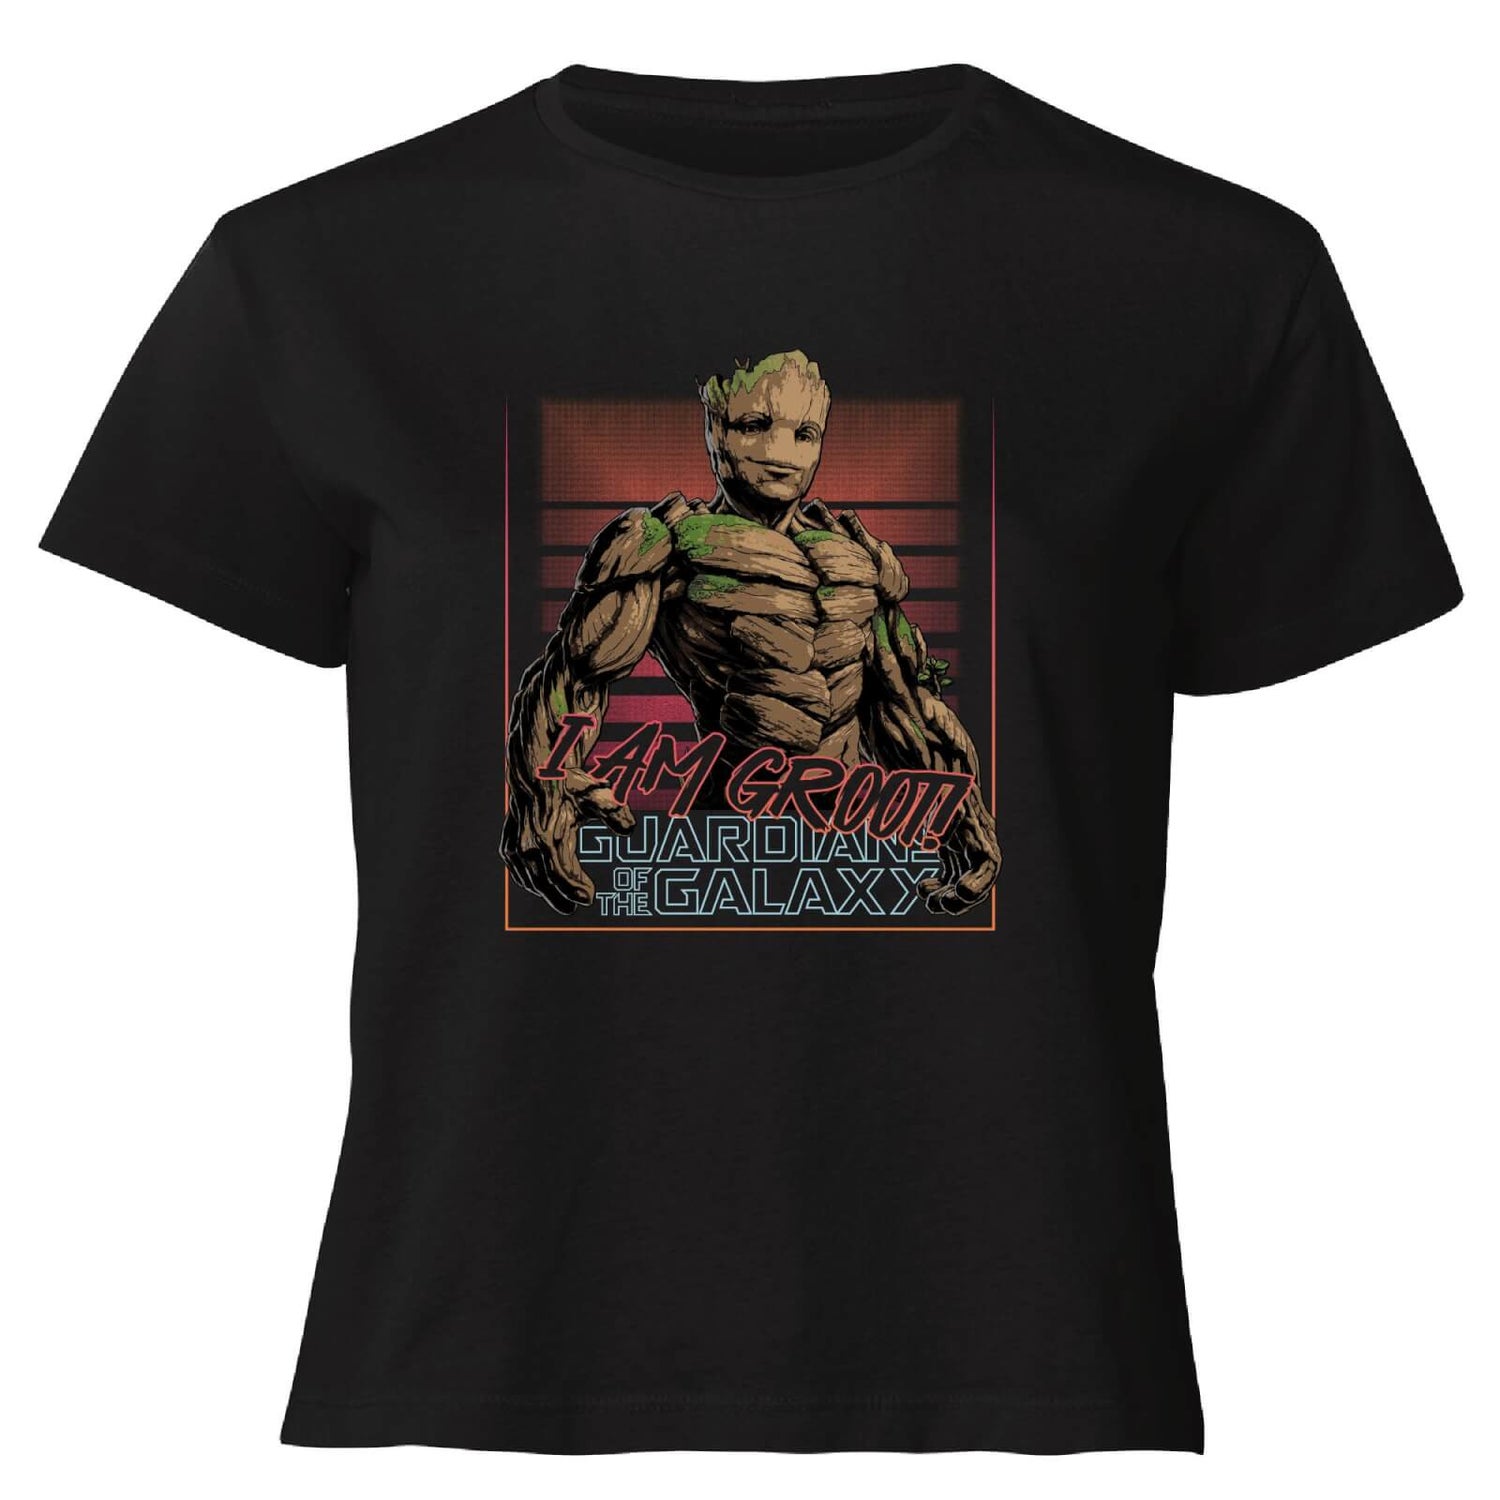 Guardians of the Galaxy I Am Retro Groot! Women's Cropped T-Shirt - Black